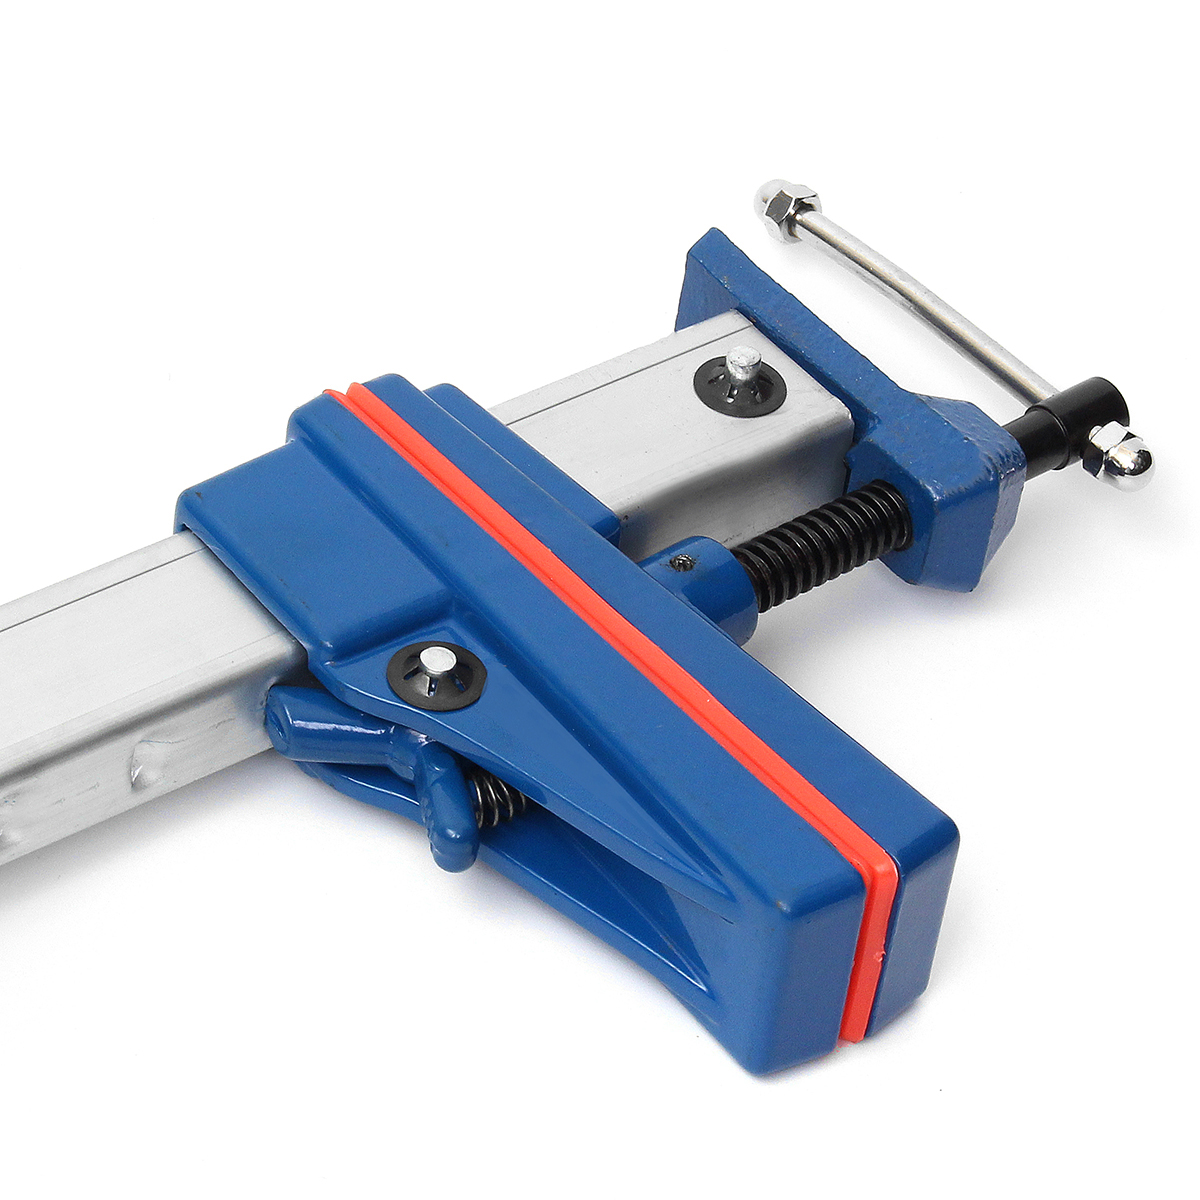 2436-Inch-Aluminum-Alloy-F-Clamp-Bar-Quick-Release-Woodworking-Clamp-Parallel-Adjustable-Heavy-Duty--1361735-10